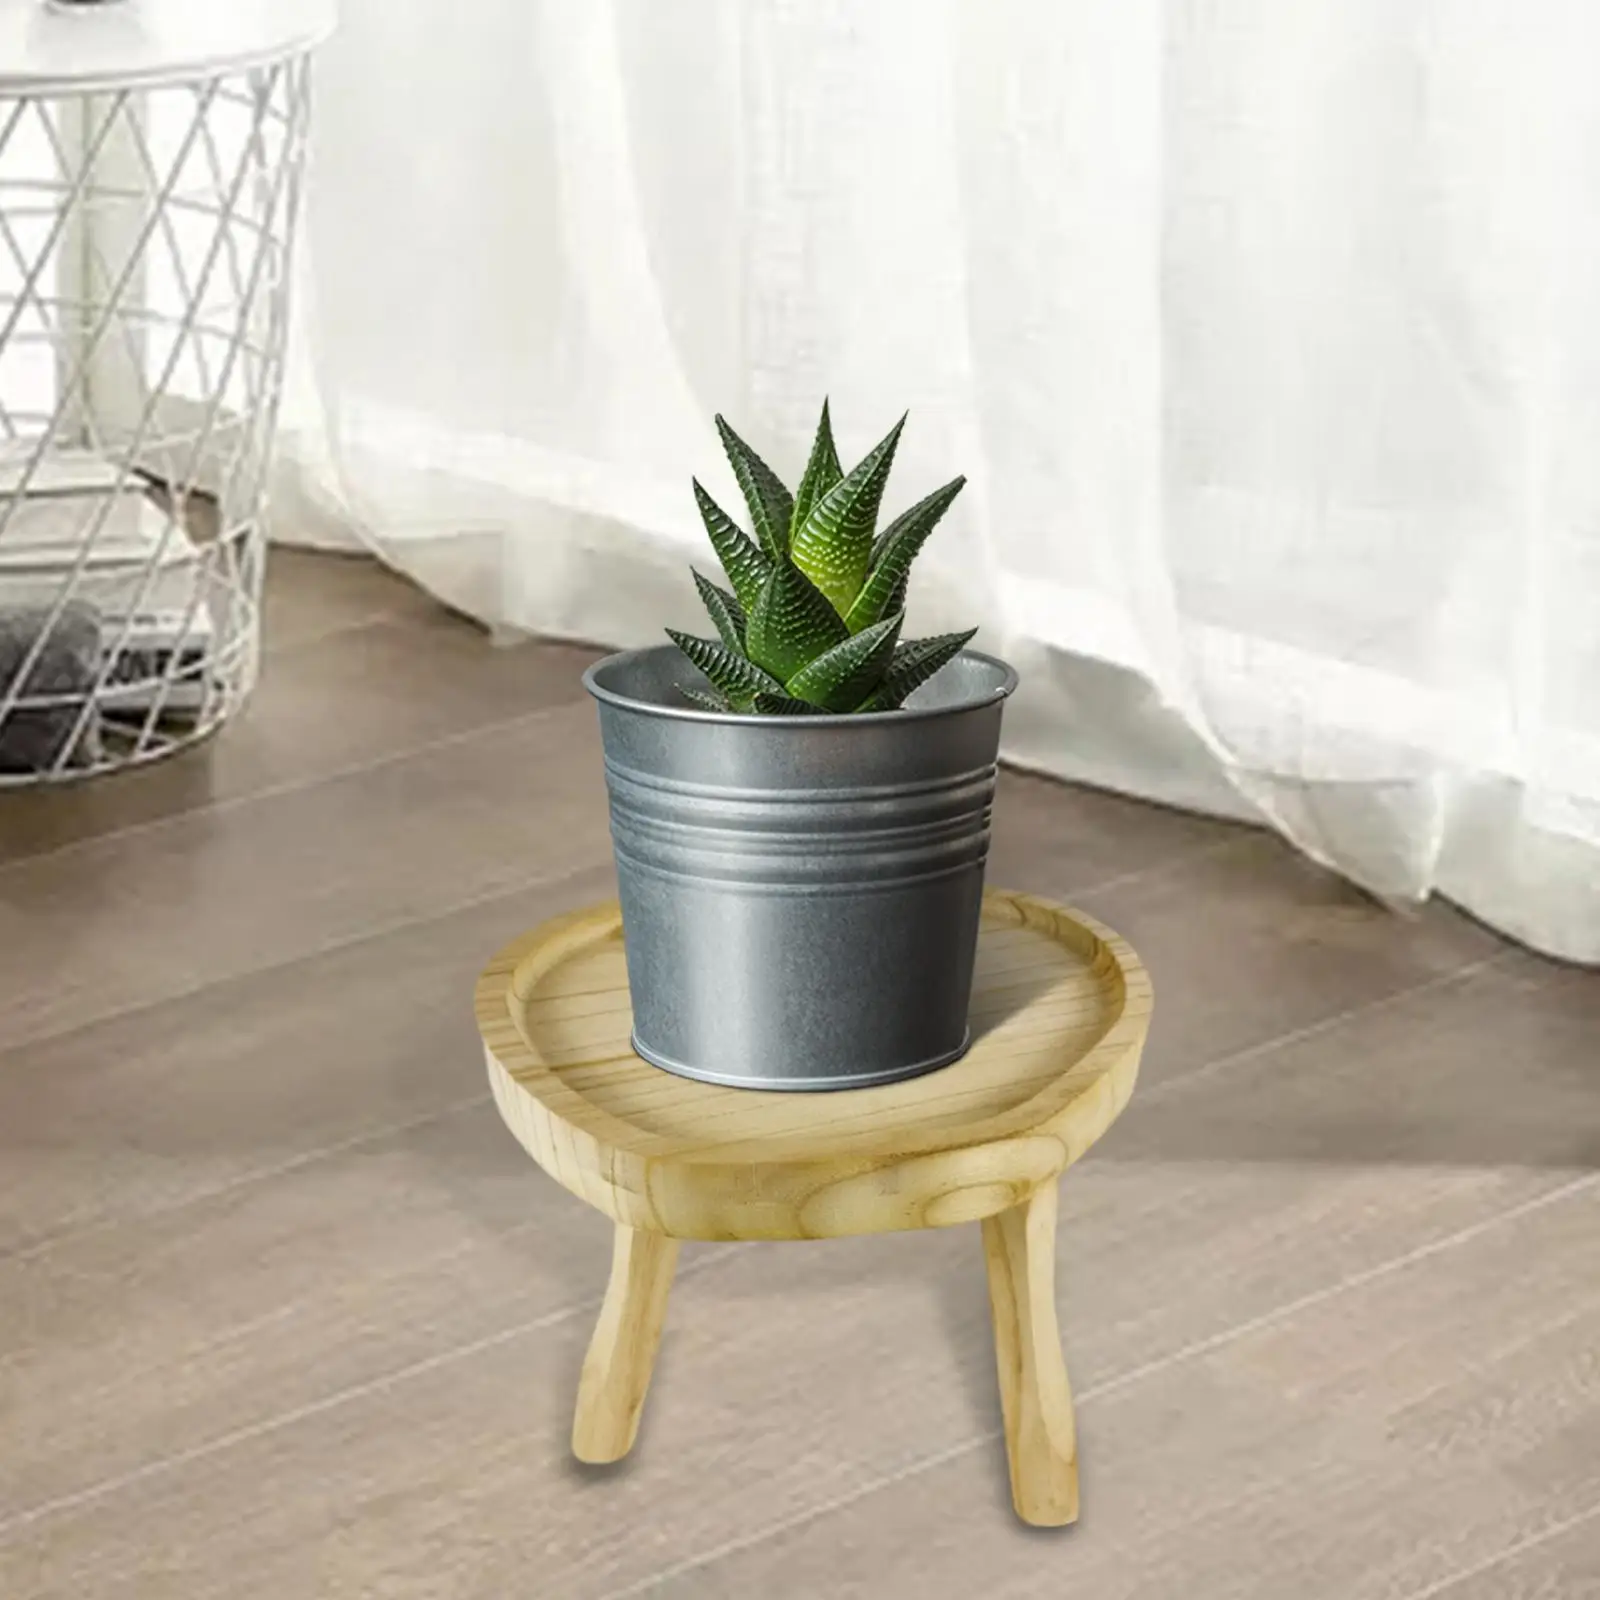 Wooden Flowerpot Holder Stool Display Stand Stylish Multifunction Plant Stand Stable Round for Table Office Home Balcony Garden